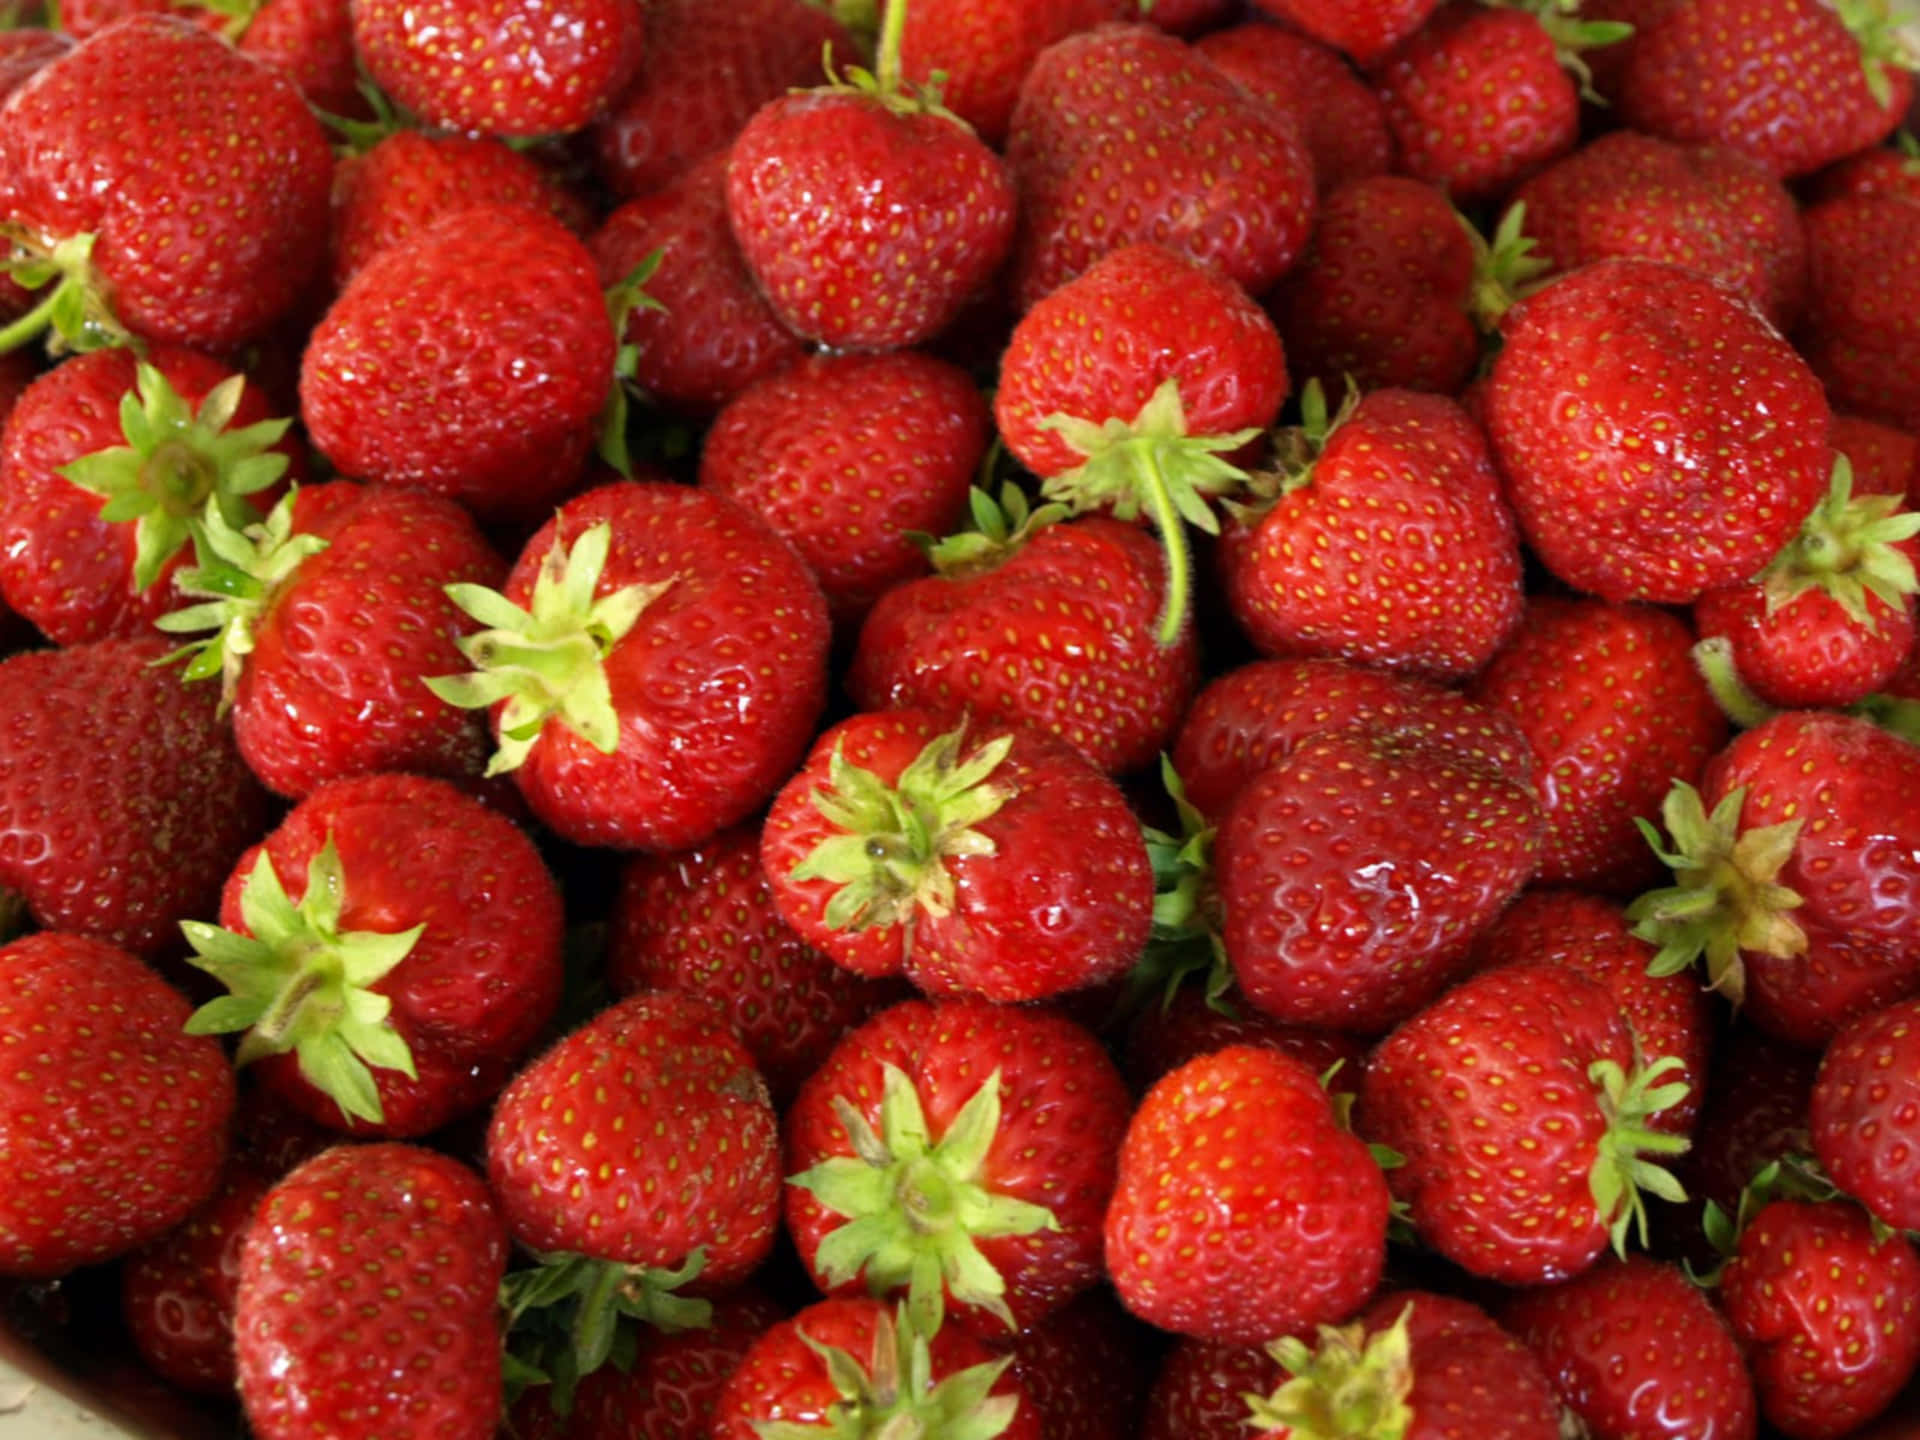 Enjoy the sweetness of summer with delicious strawberries